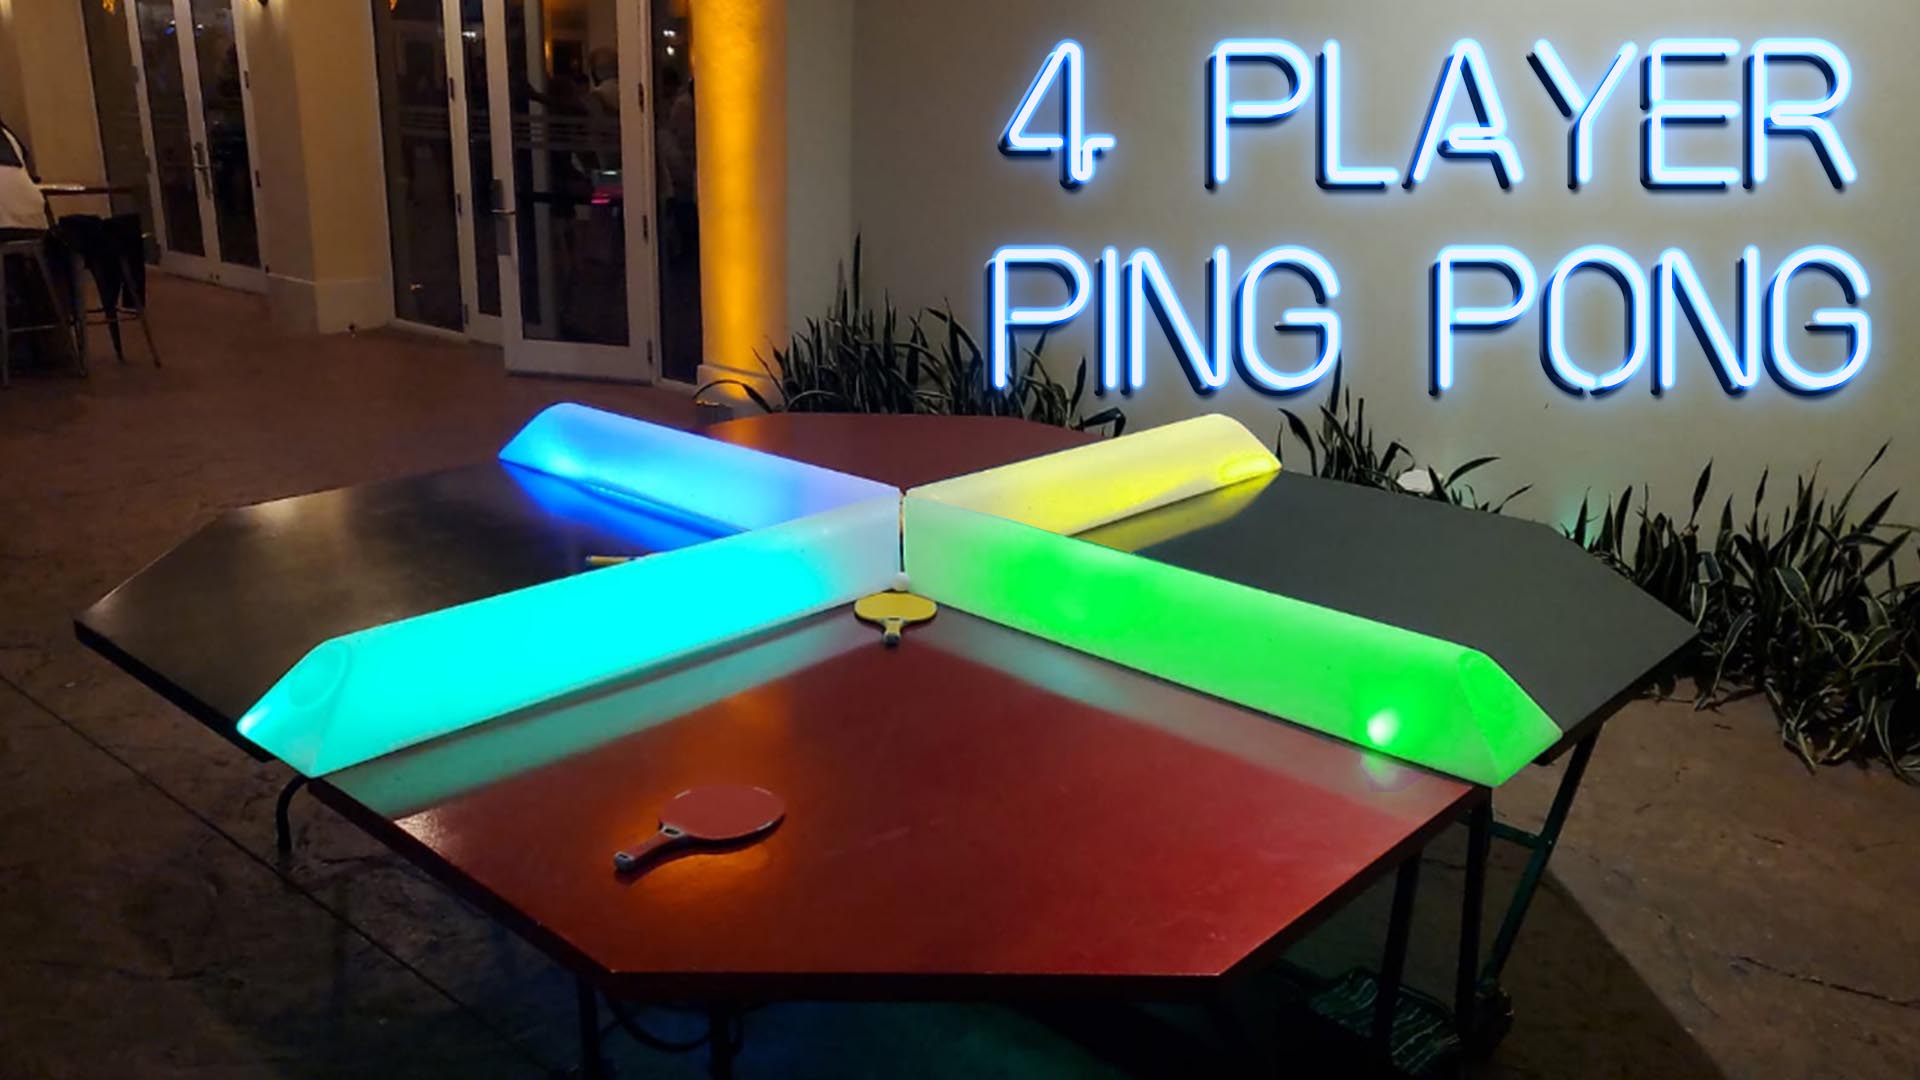 4-player ping pong with LED lights event rental game